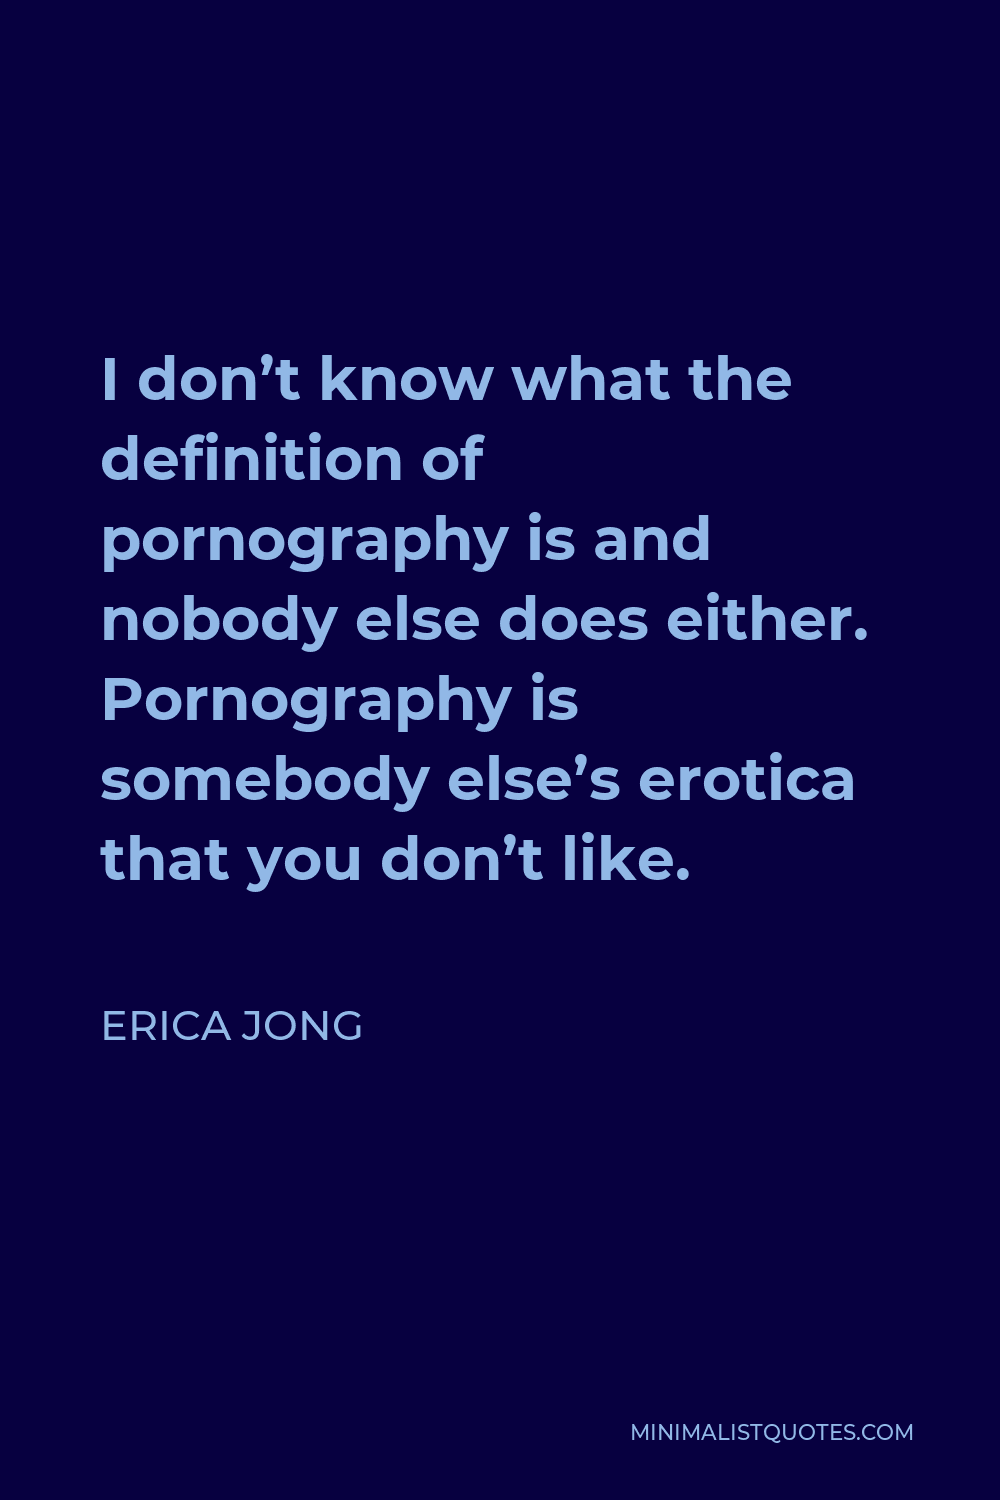 Erica Jong Quote - I don’t know what the definition of pornography is and nobody else does either. Pornography is somebody else’s erotica that you don’t like.